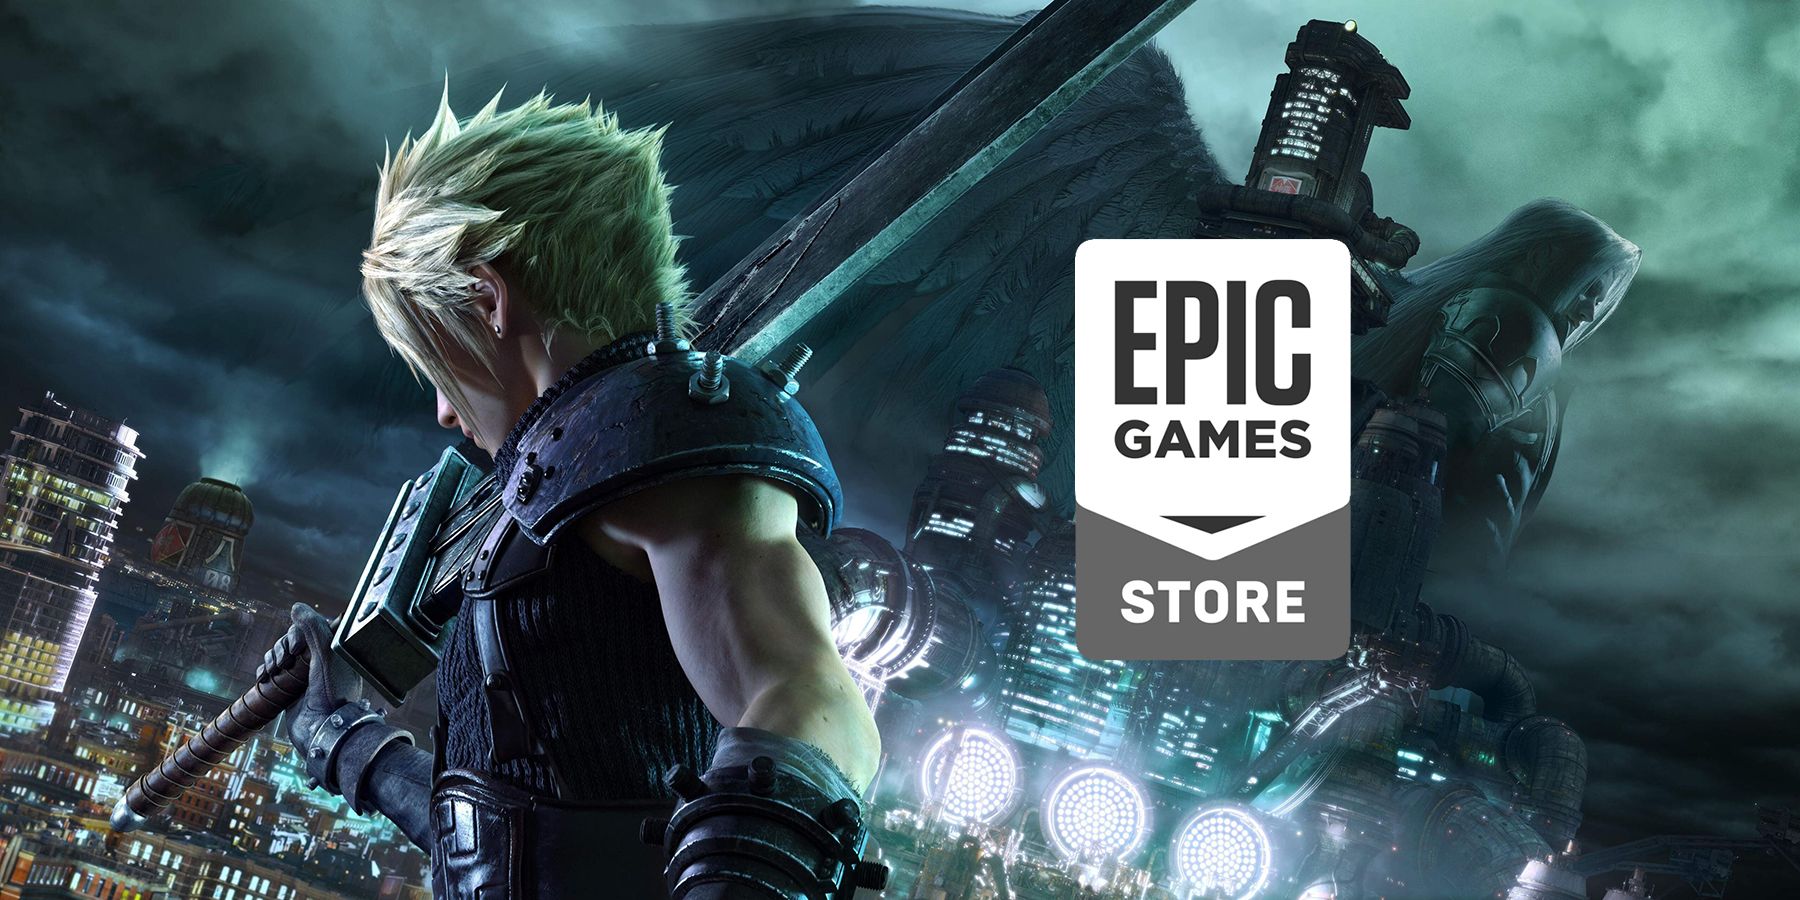 final-fantasy-7-remake-pc-port-issues-epic-games-store